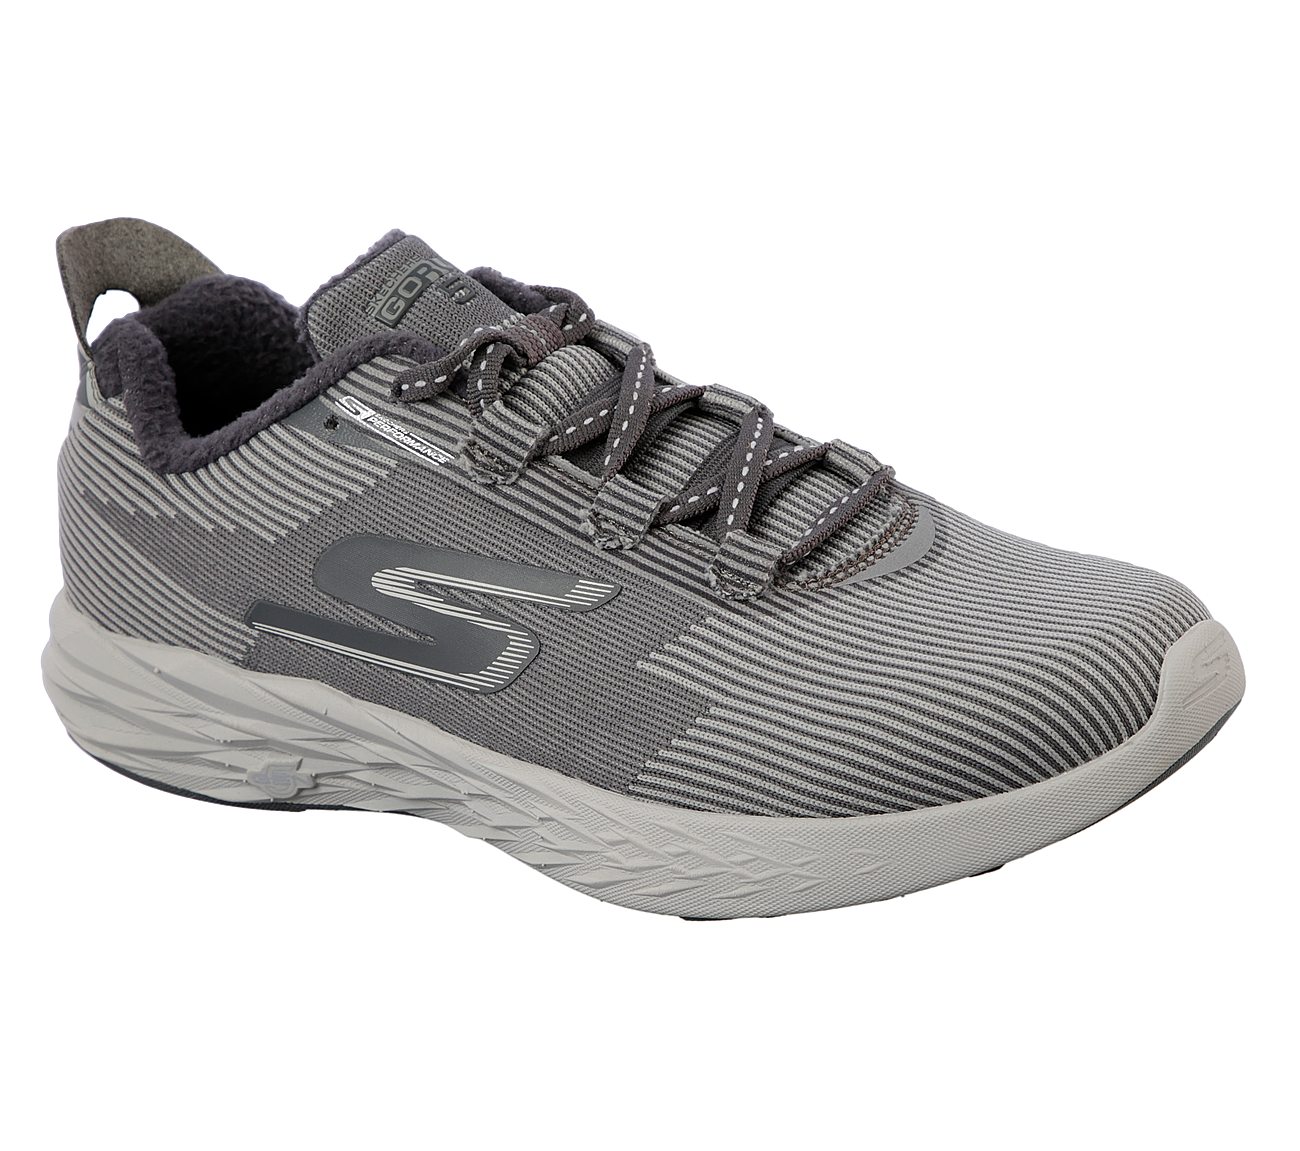 GOtherm 360 Skechers Performance Shoes